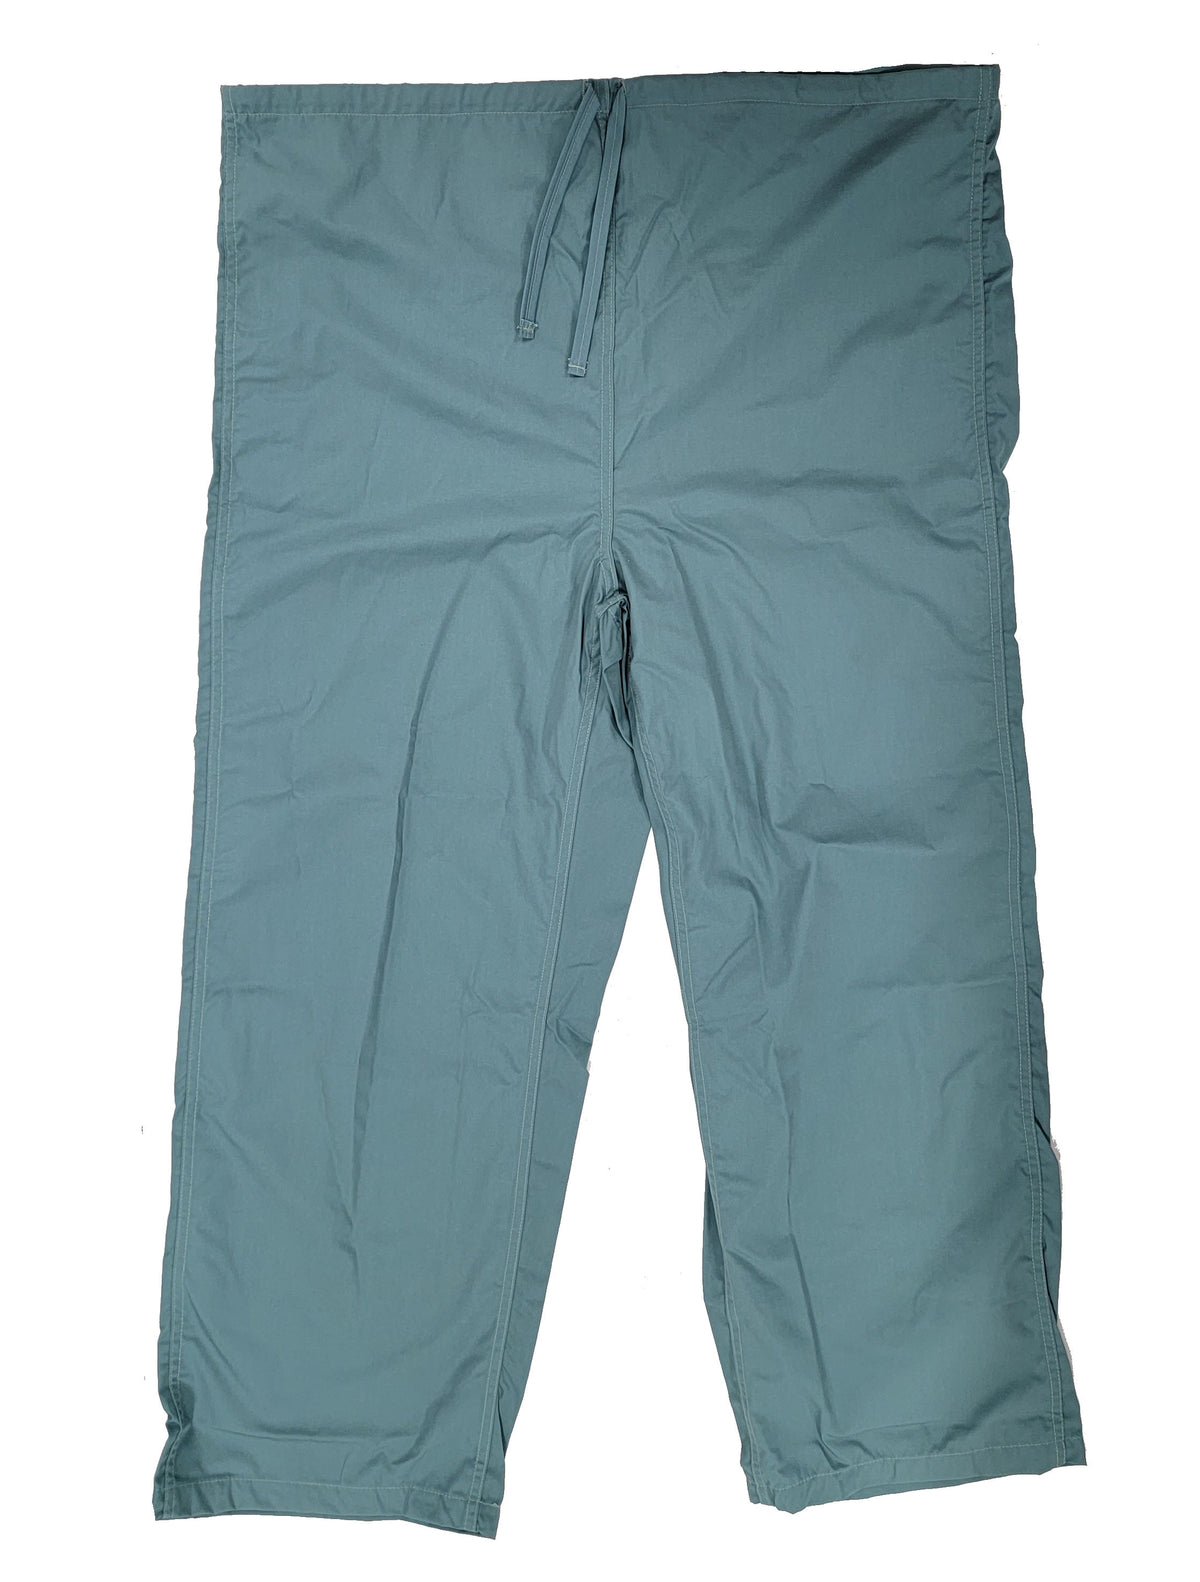 Military Men's Surgical Operating Trousers - Size LARGE Scrub Pants